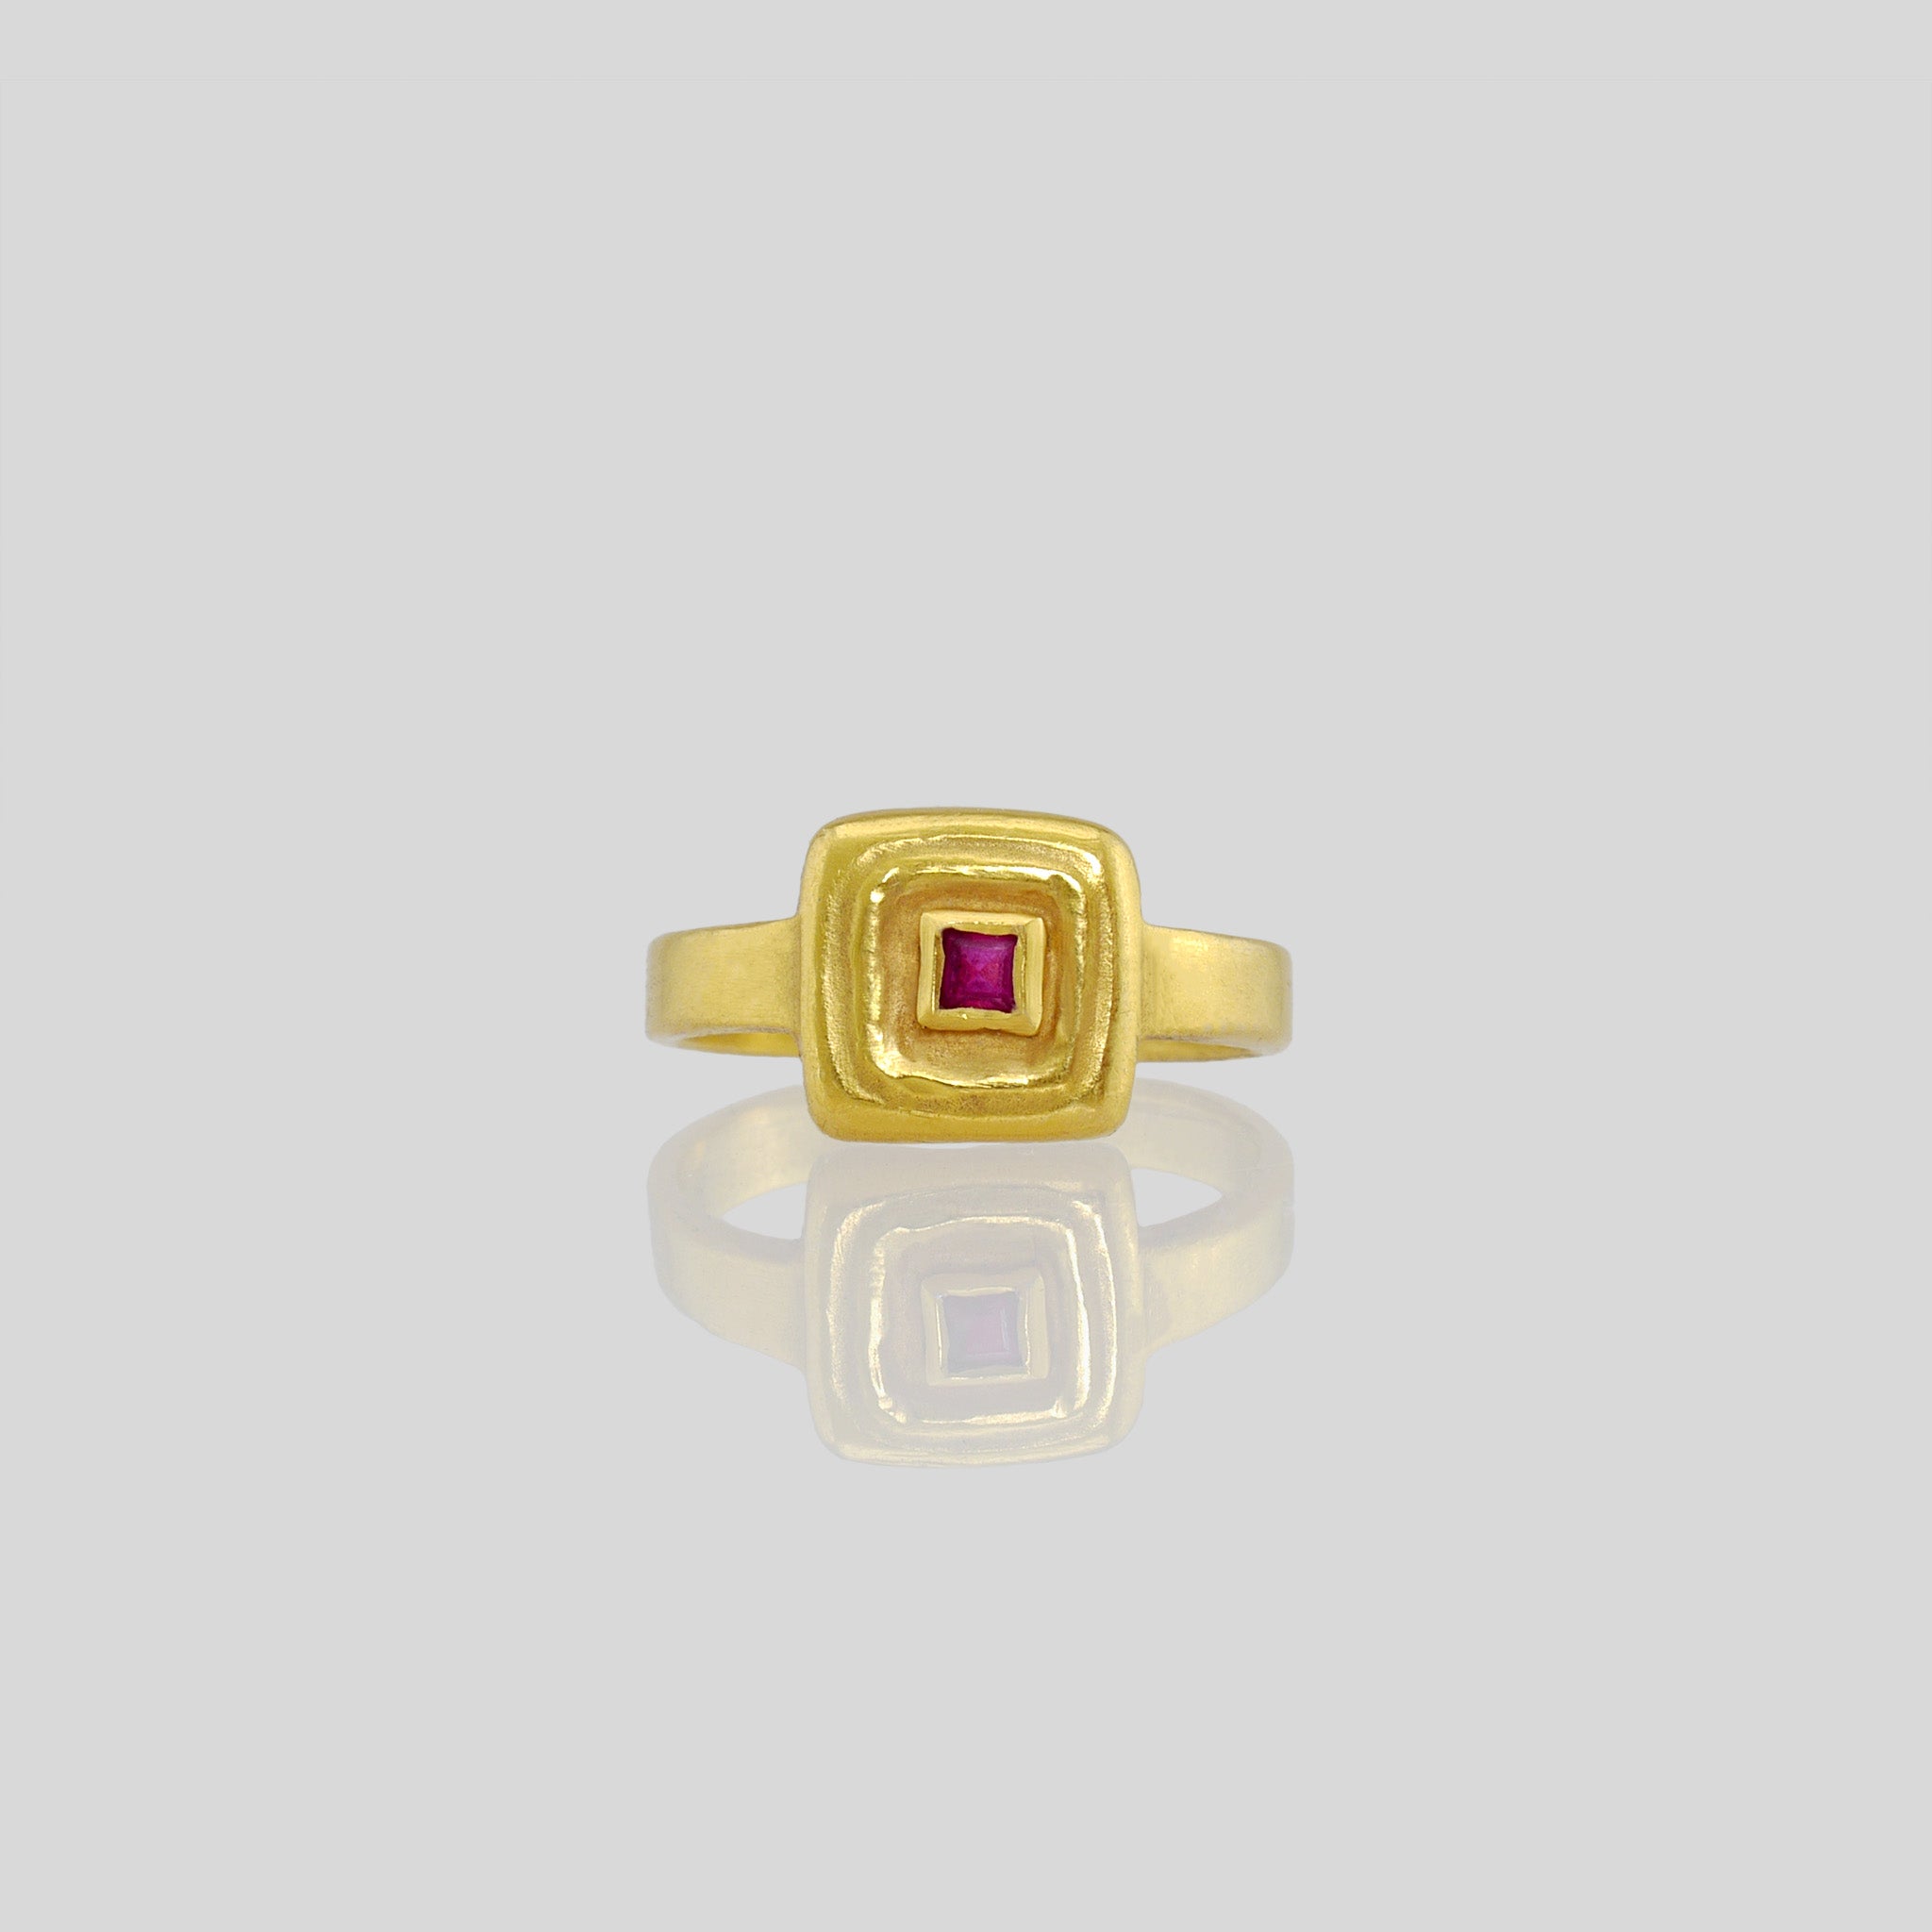 Front view of Handcrafted 18k Gold ring featuring a square Ruby set atop a square surface, evoking the ancient Egyptian era's golden jewelry of the Pharaohs.